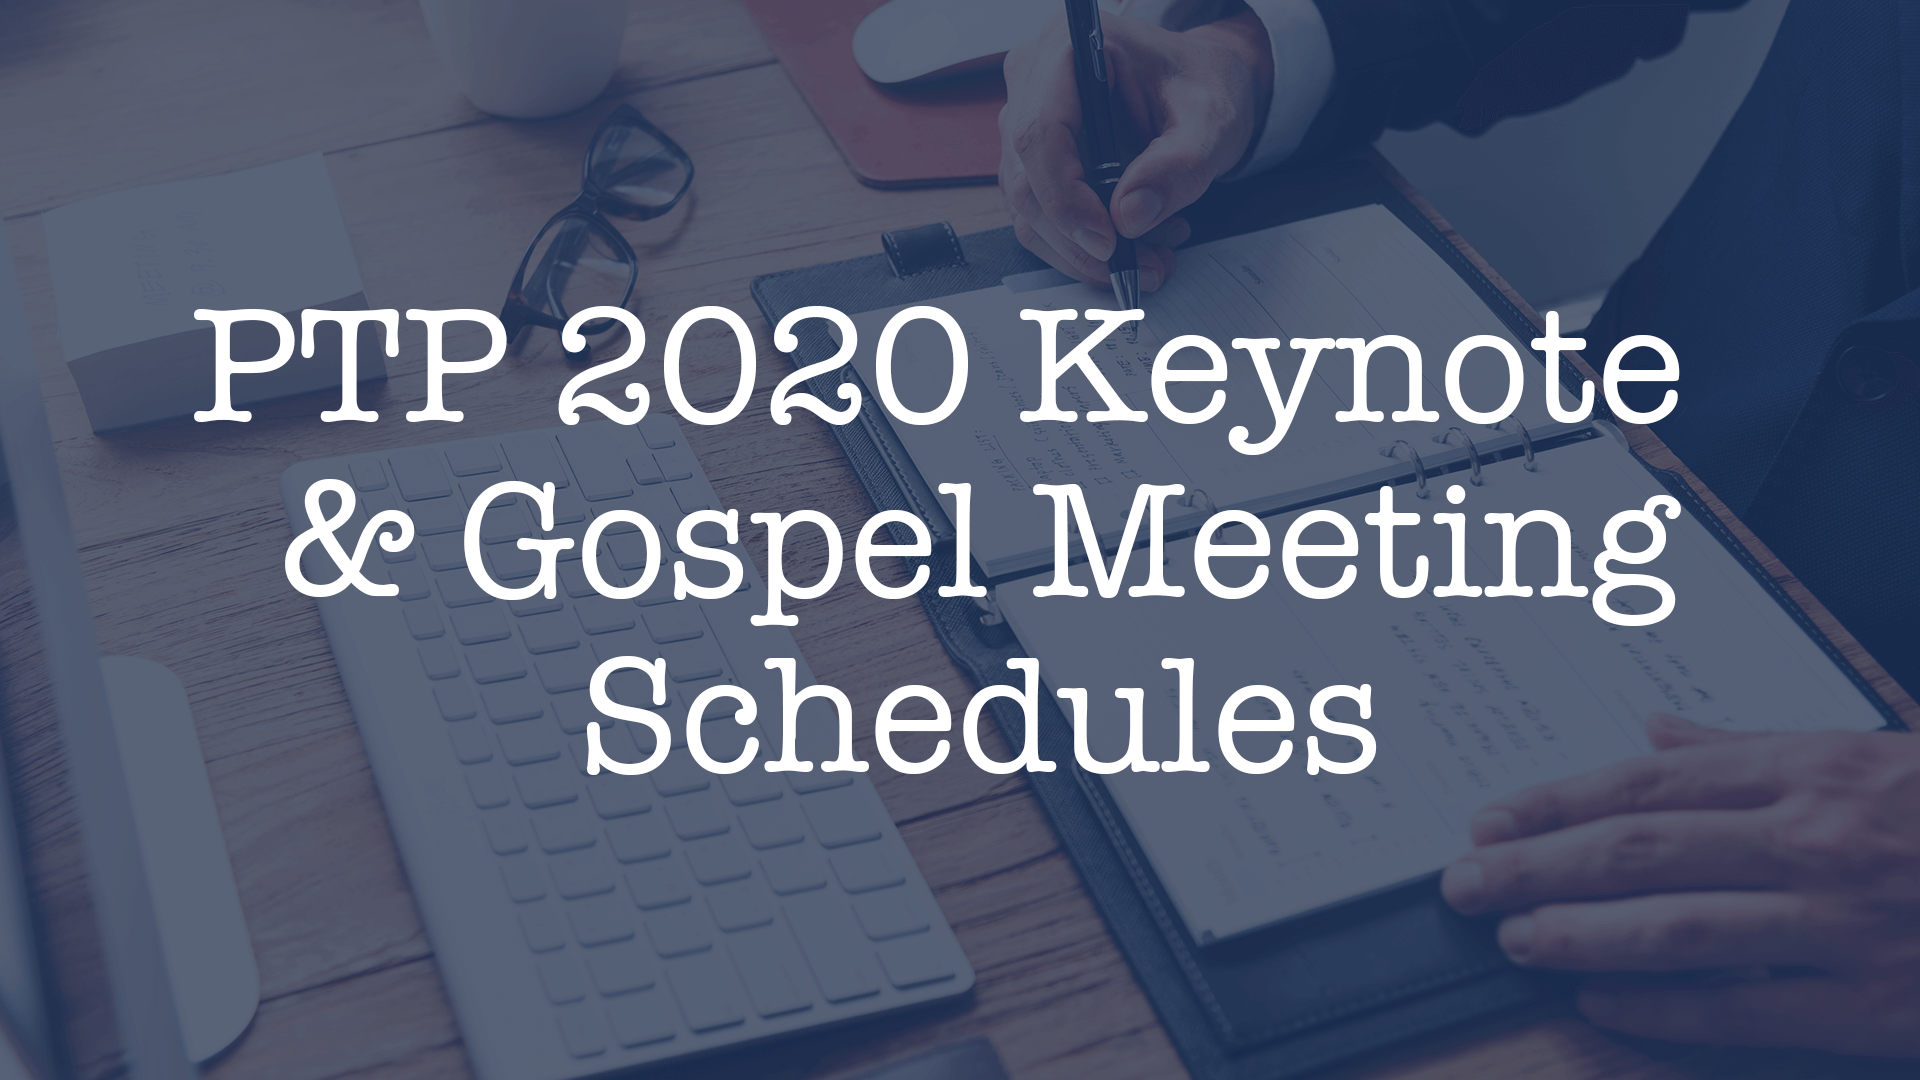 PTP 2020 Keynote Schedule | Polishing the Pulpit